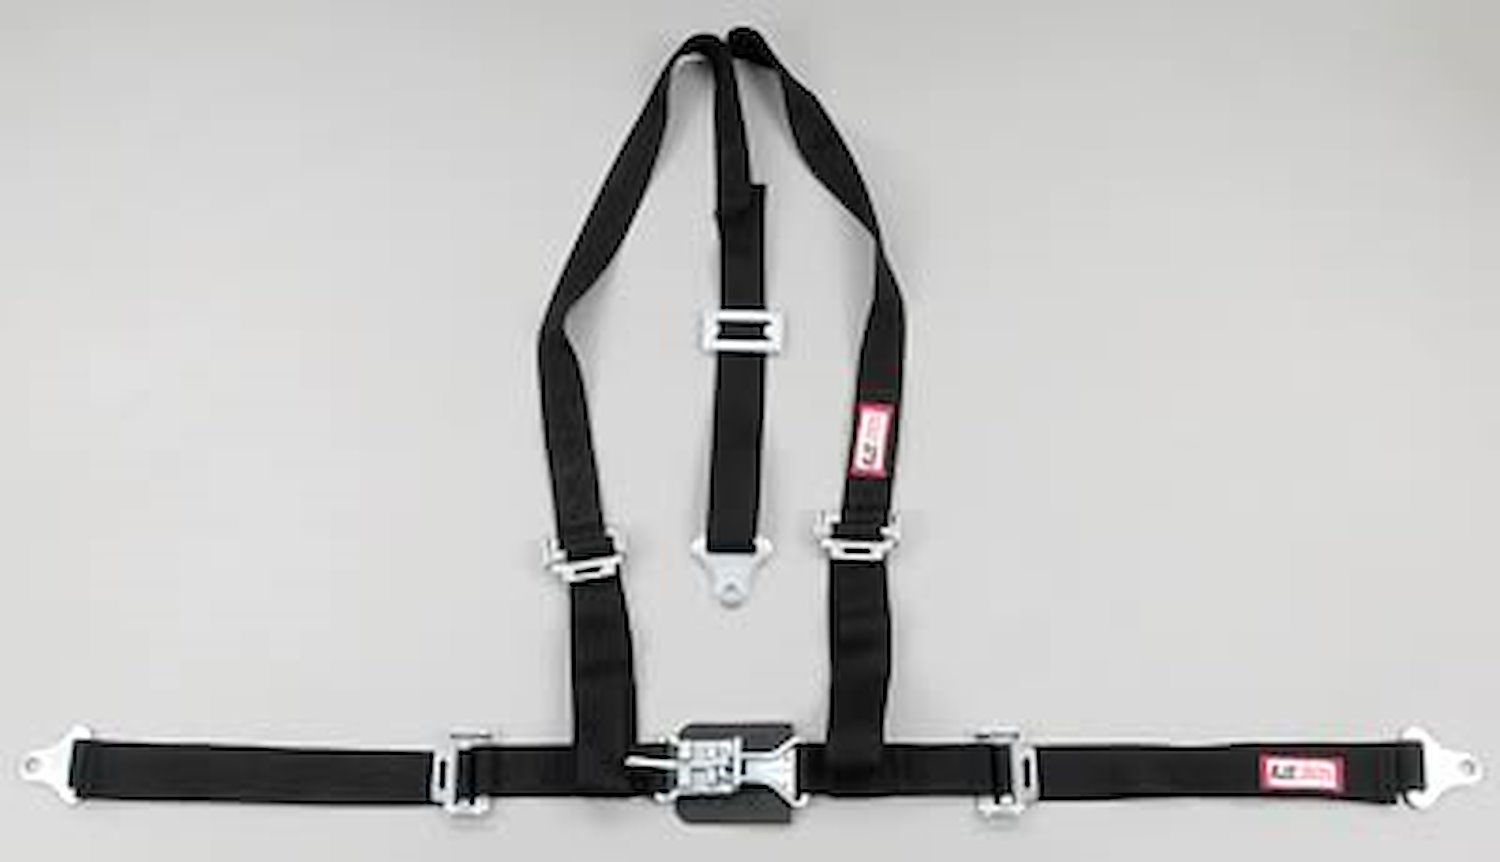 NON-SFI L&L HARNESS 2 PULL UP Lap Belt SNAP SEWN IN 2 S.H. INDIVIDUAL FLOOR Mount WRAP/SNAP YELLOW